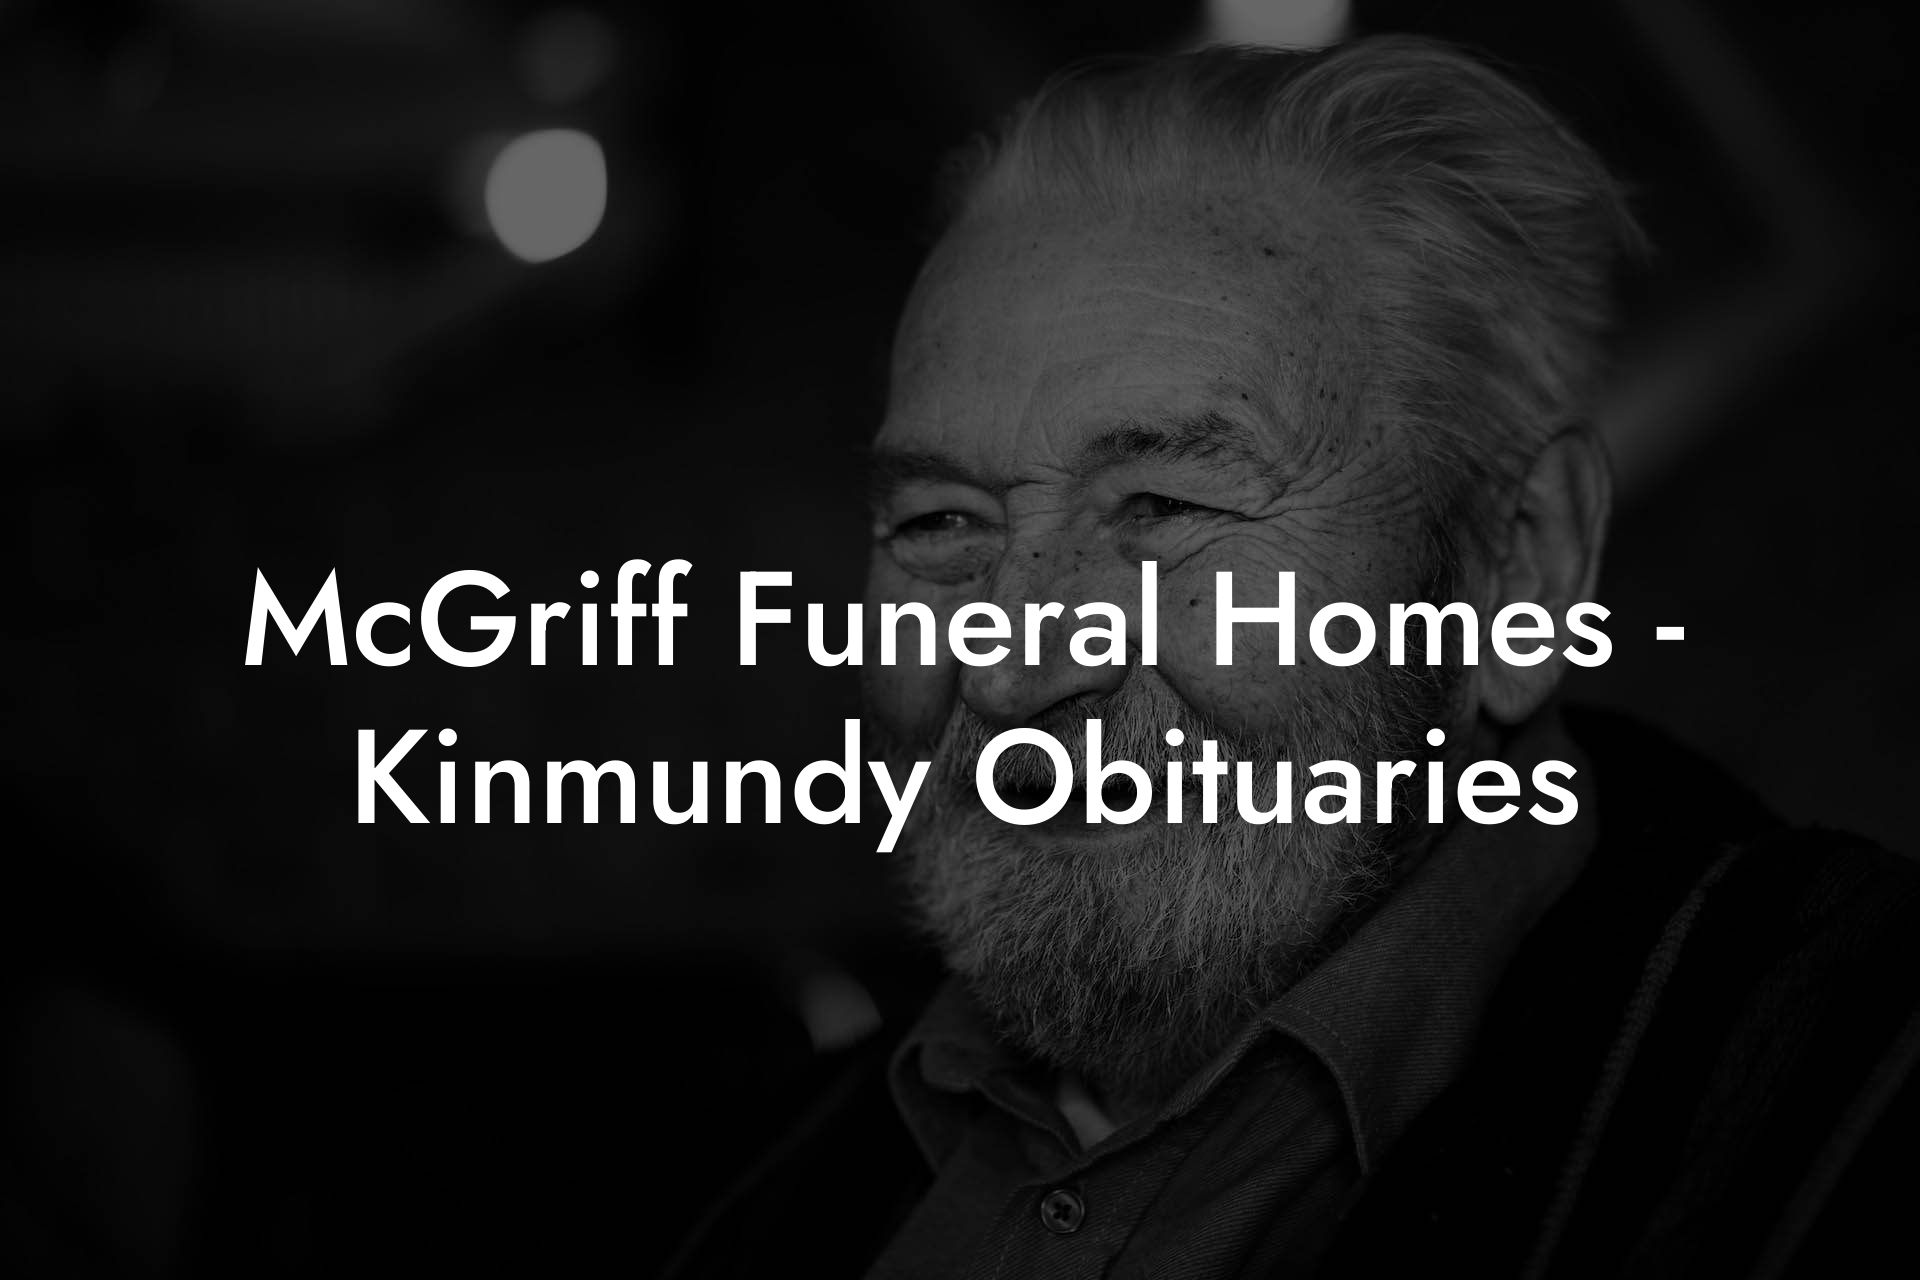 McGriff Funeral Homes - Kinmundy Obituaries